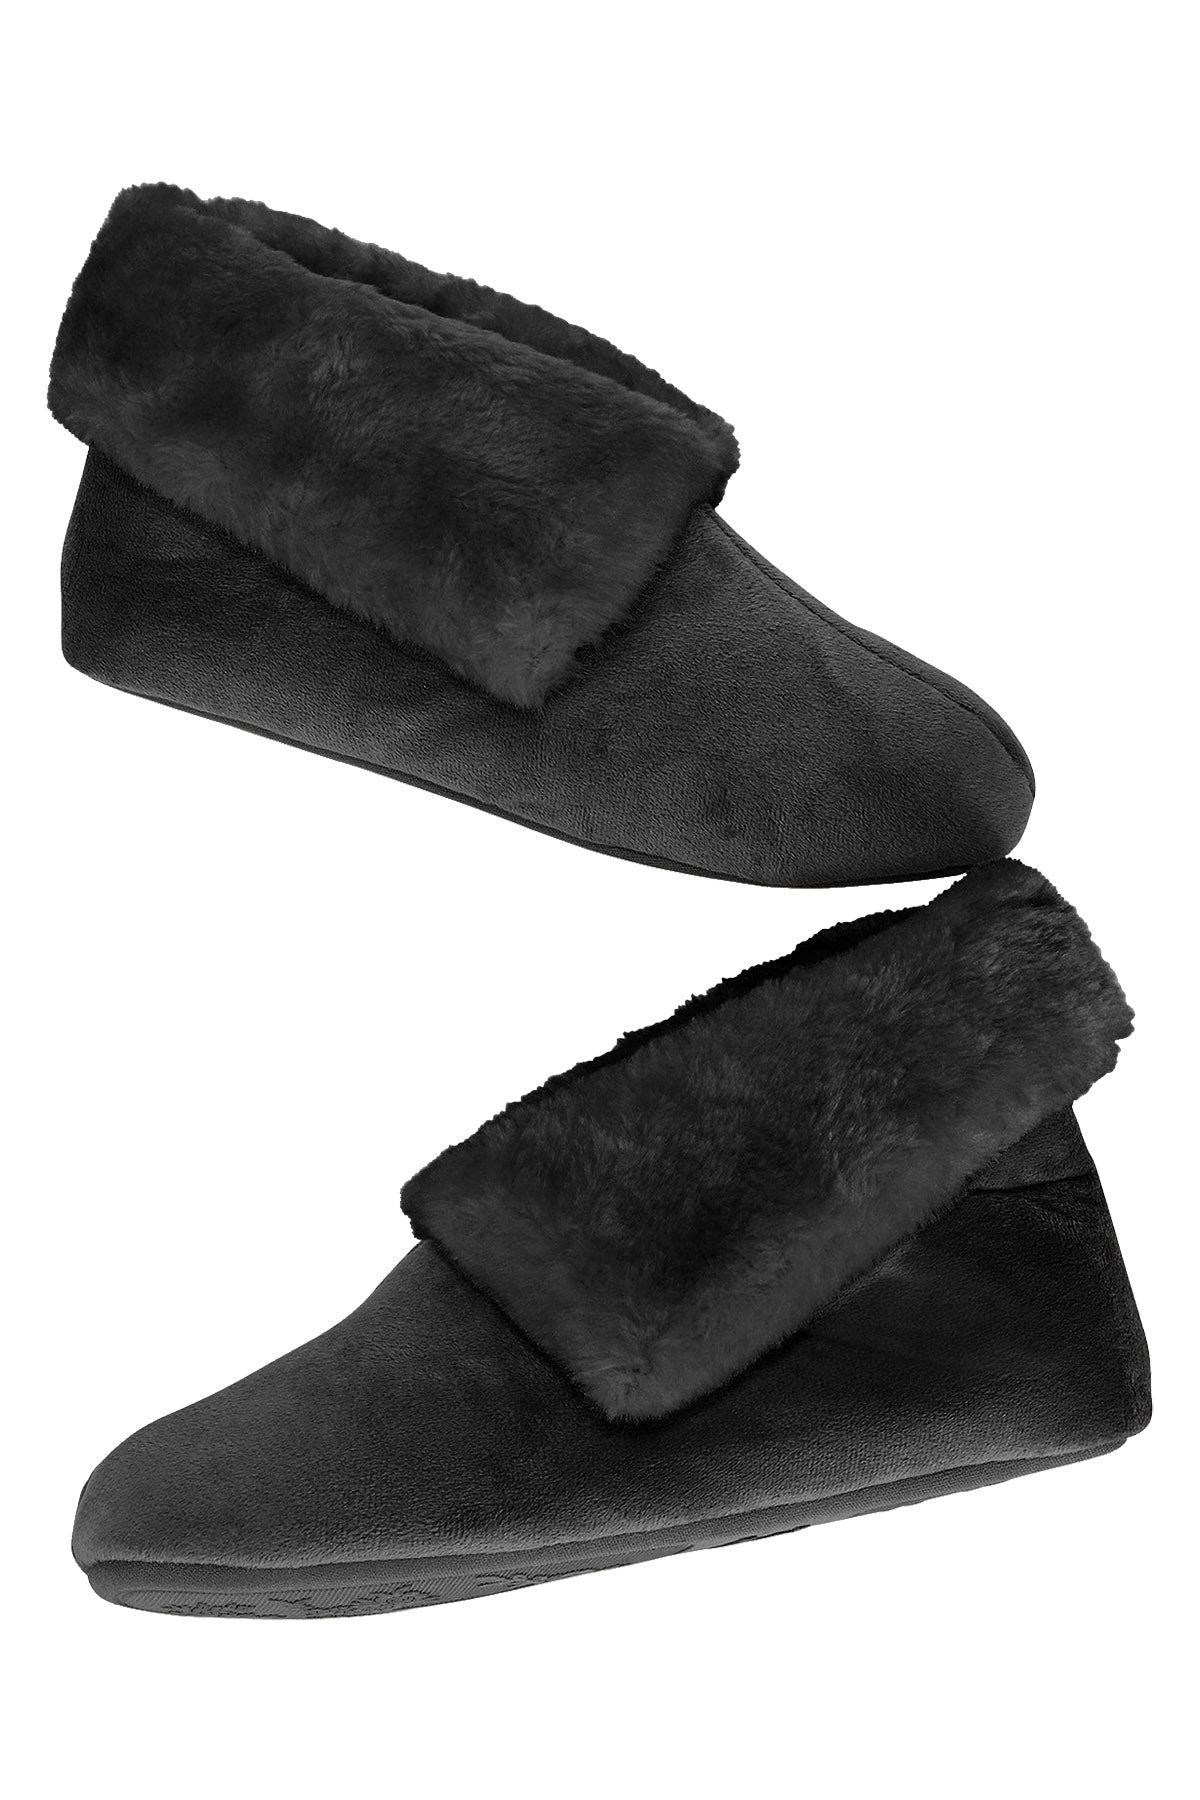 Charter Club Intimates Black Microvelour Memory Foam Bootie Slippers